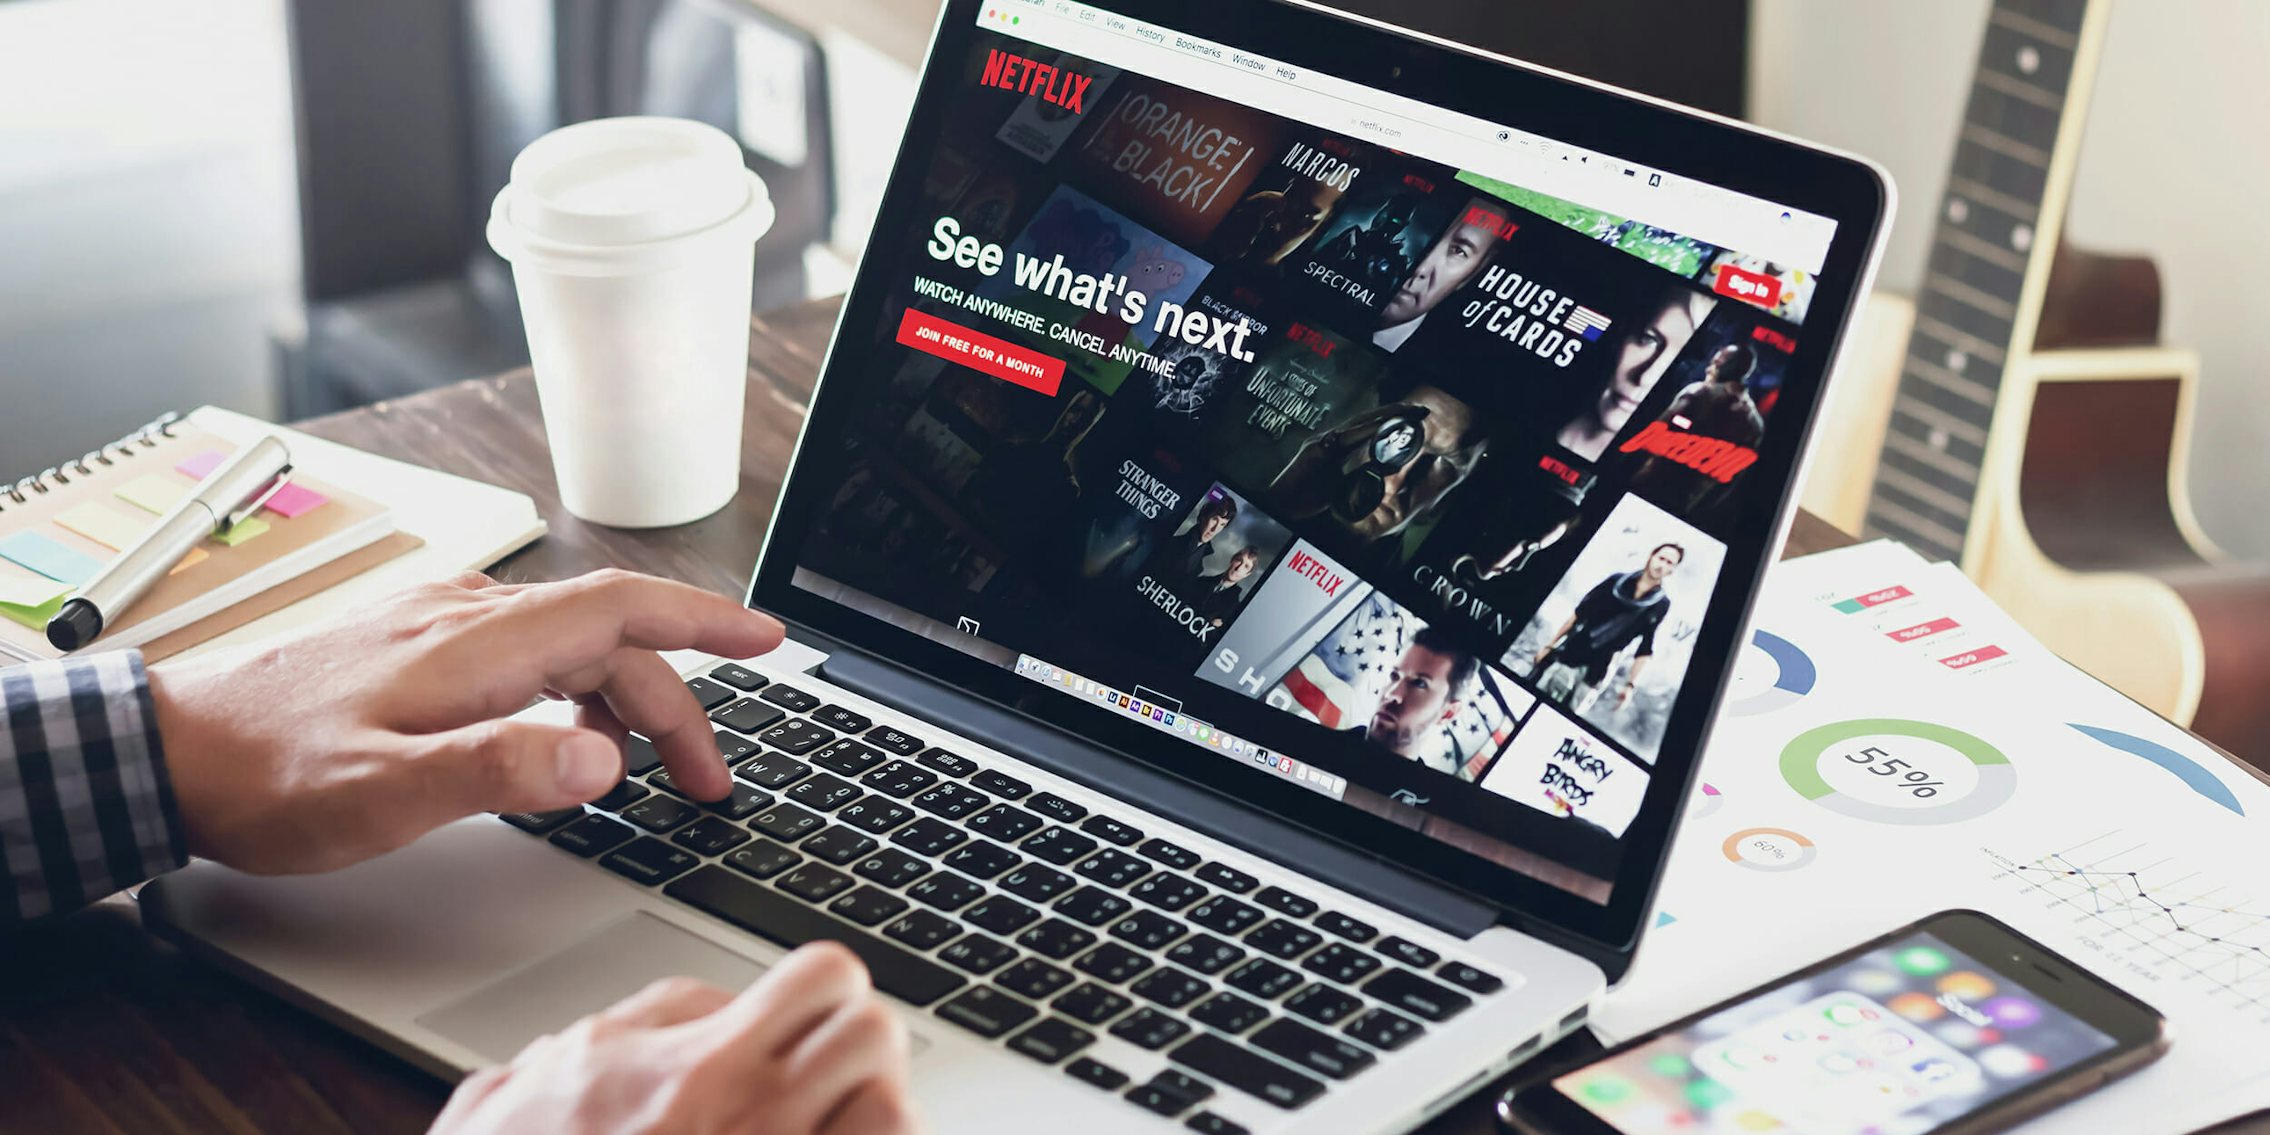 How much data does netflix use